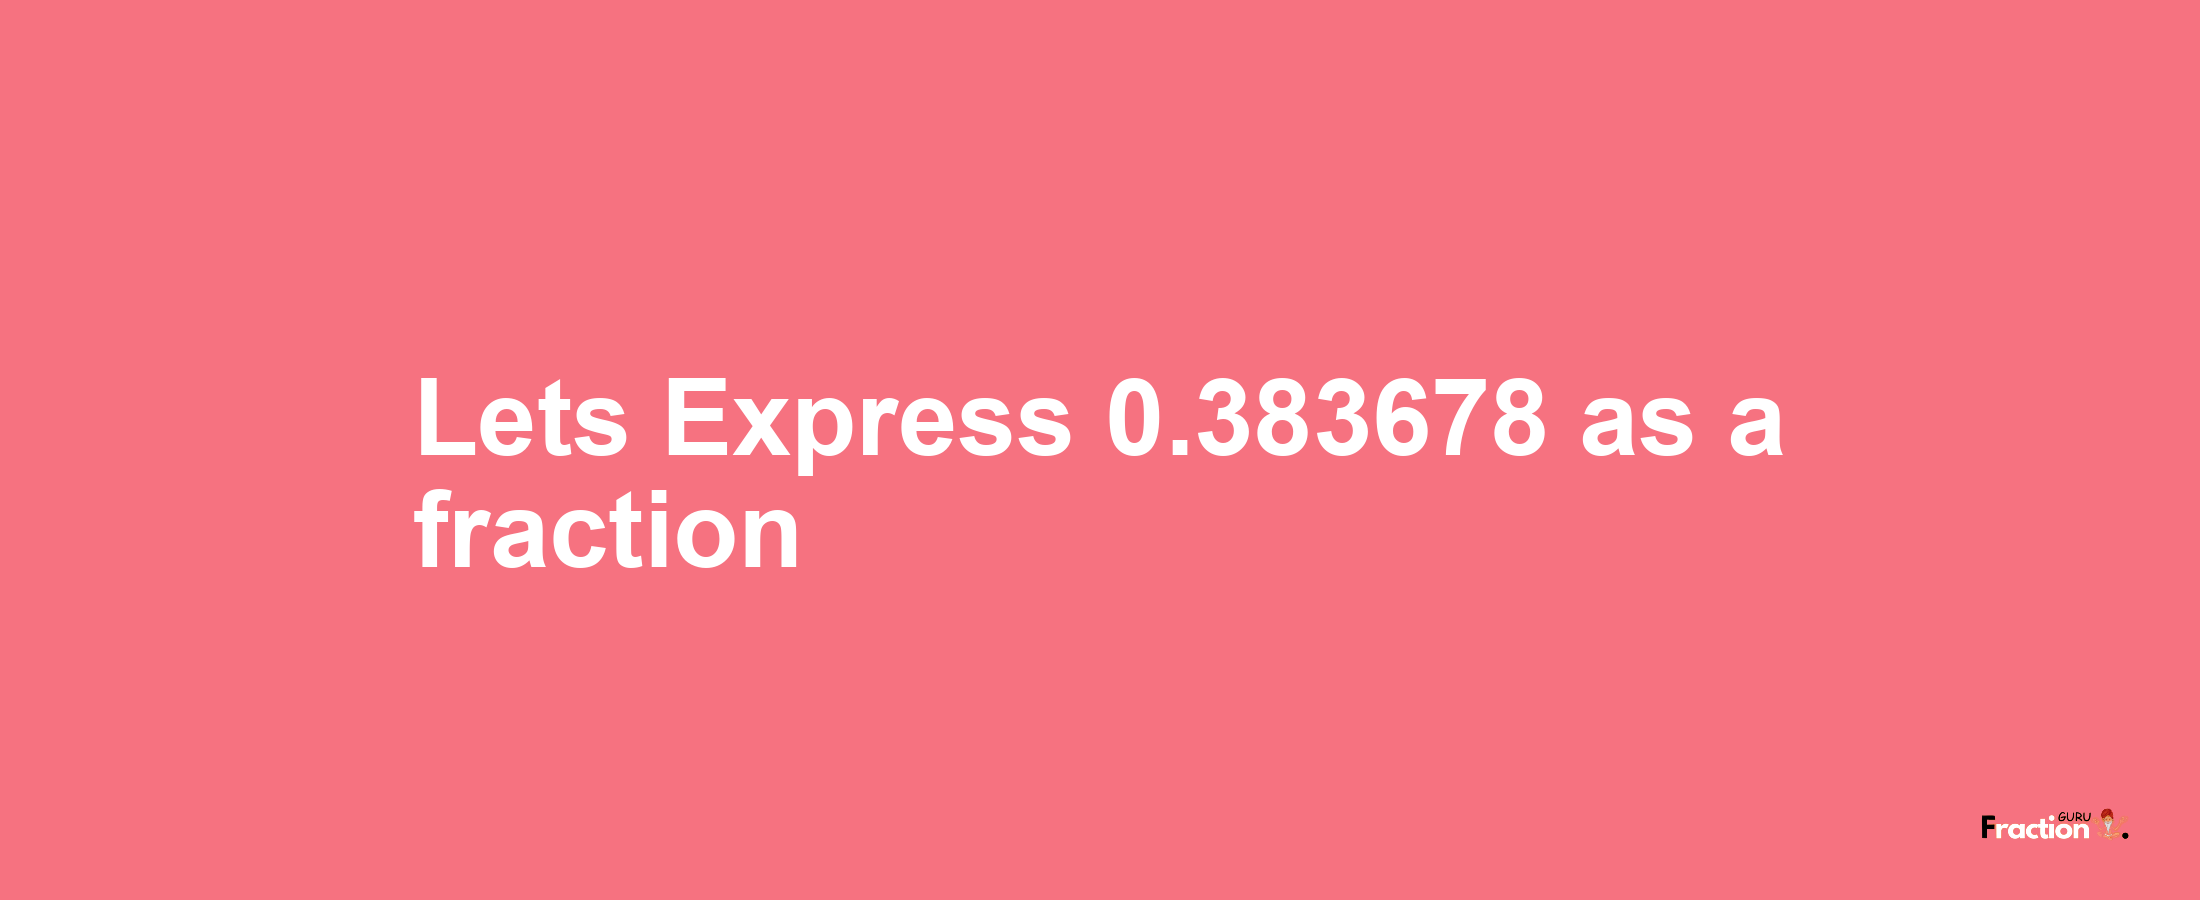 Lets Express 0.383678 as afraction